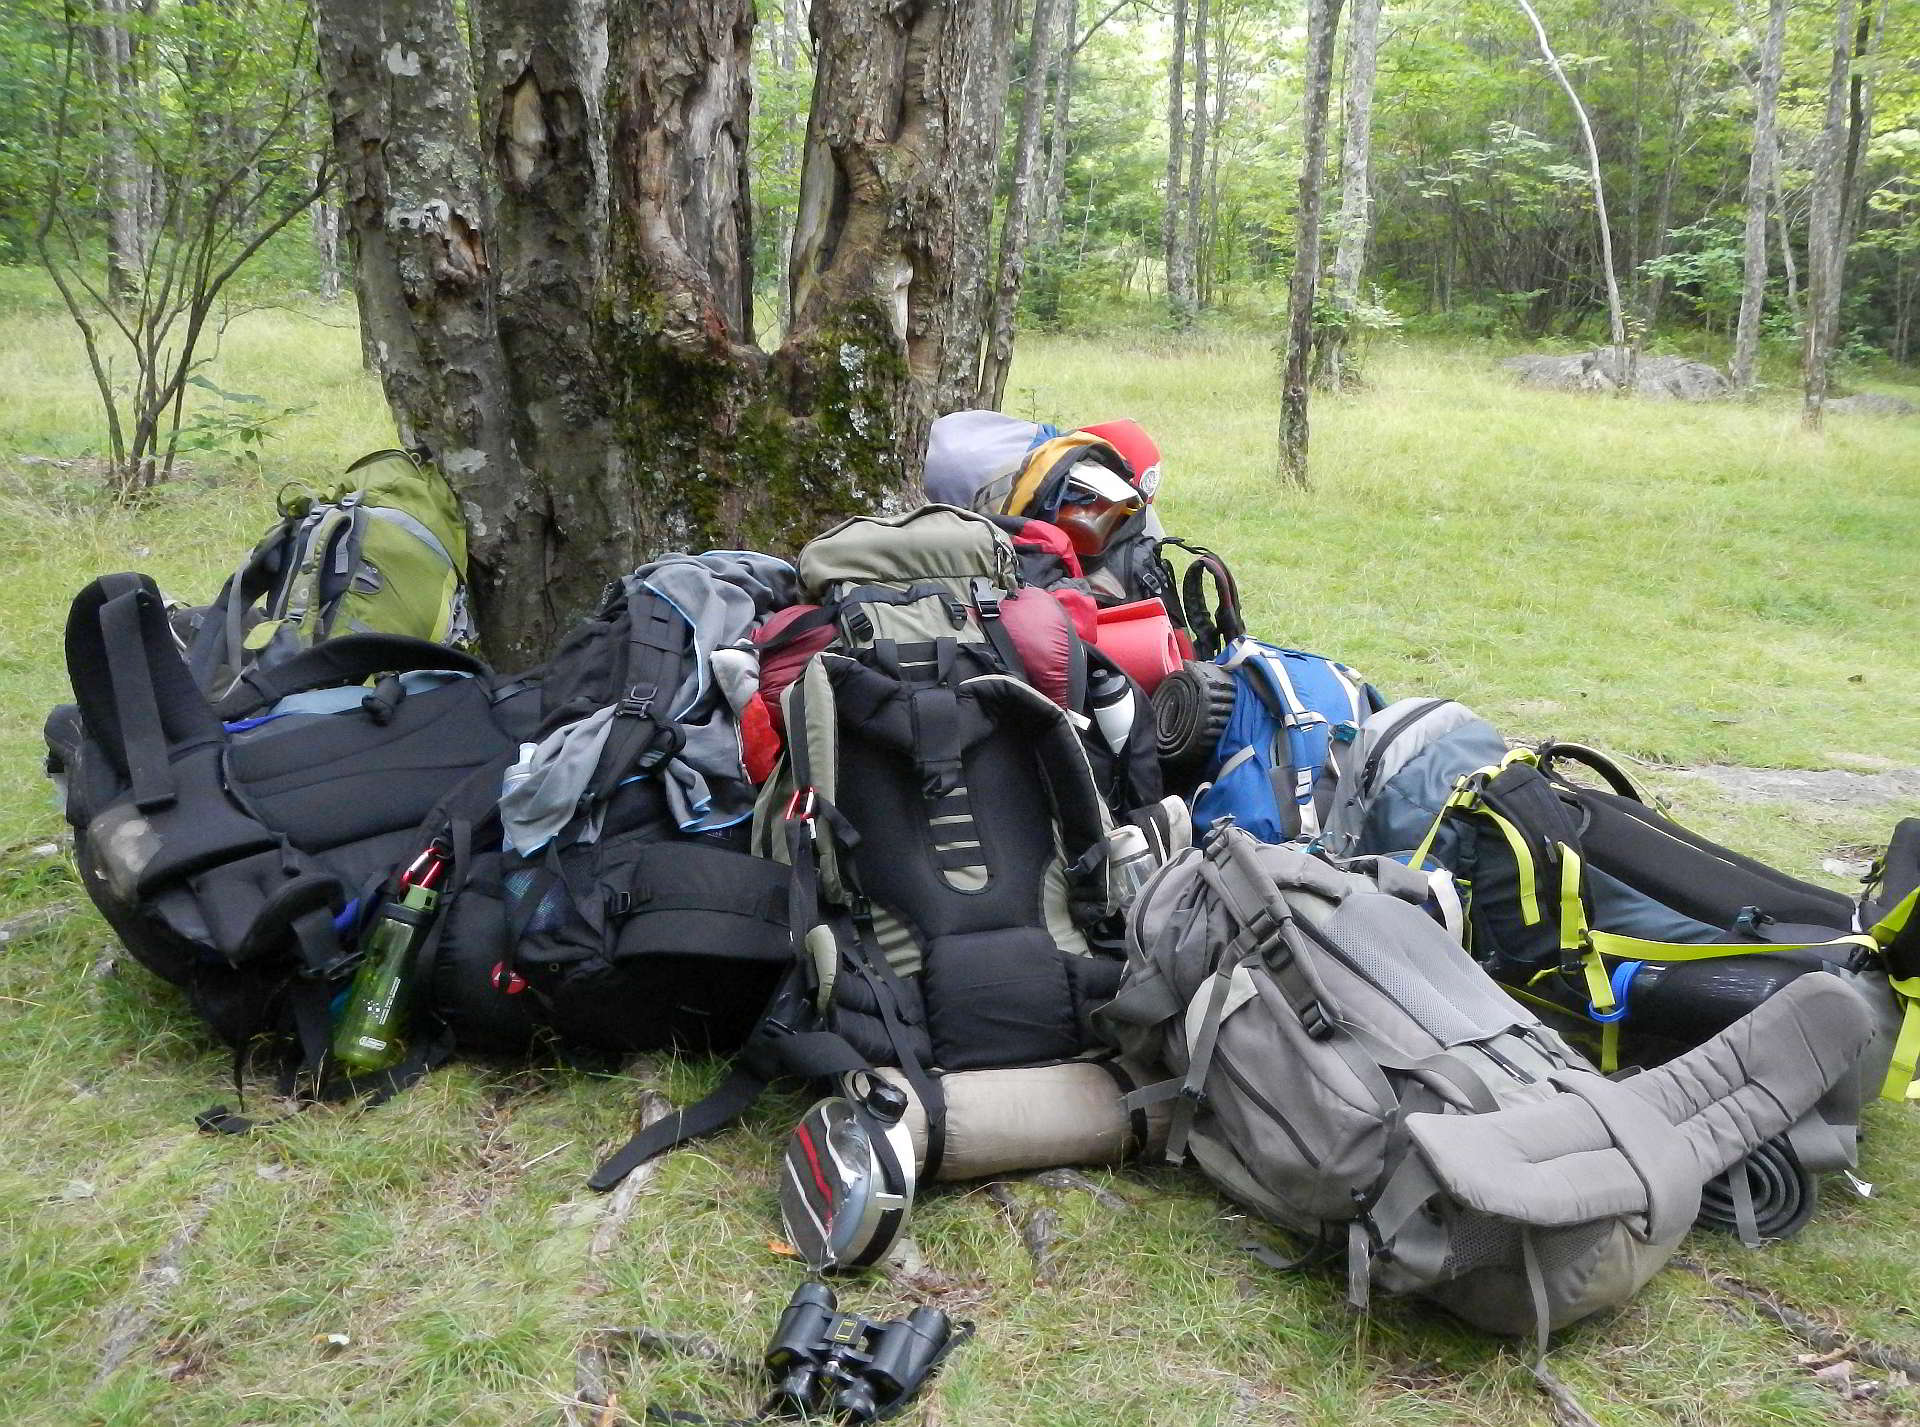 Backpacks leaning against a tree.